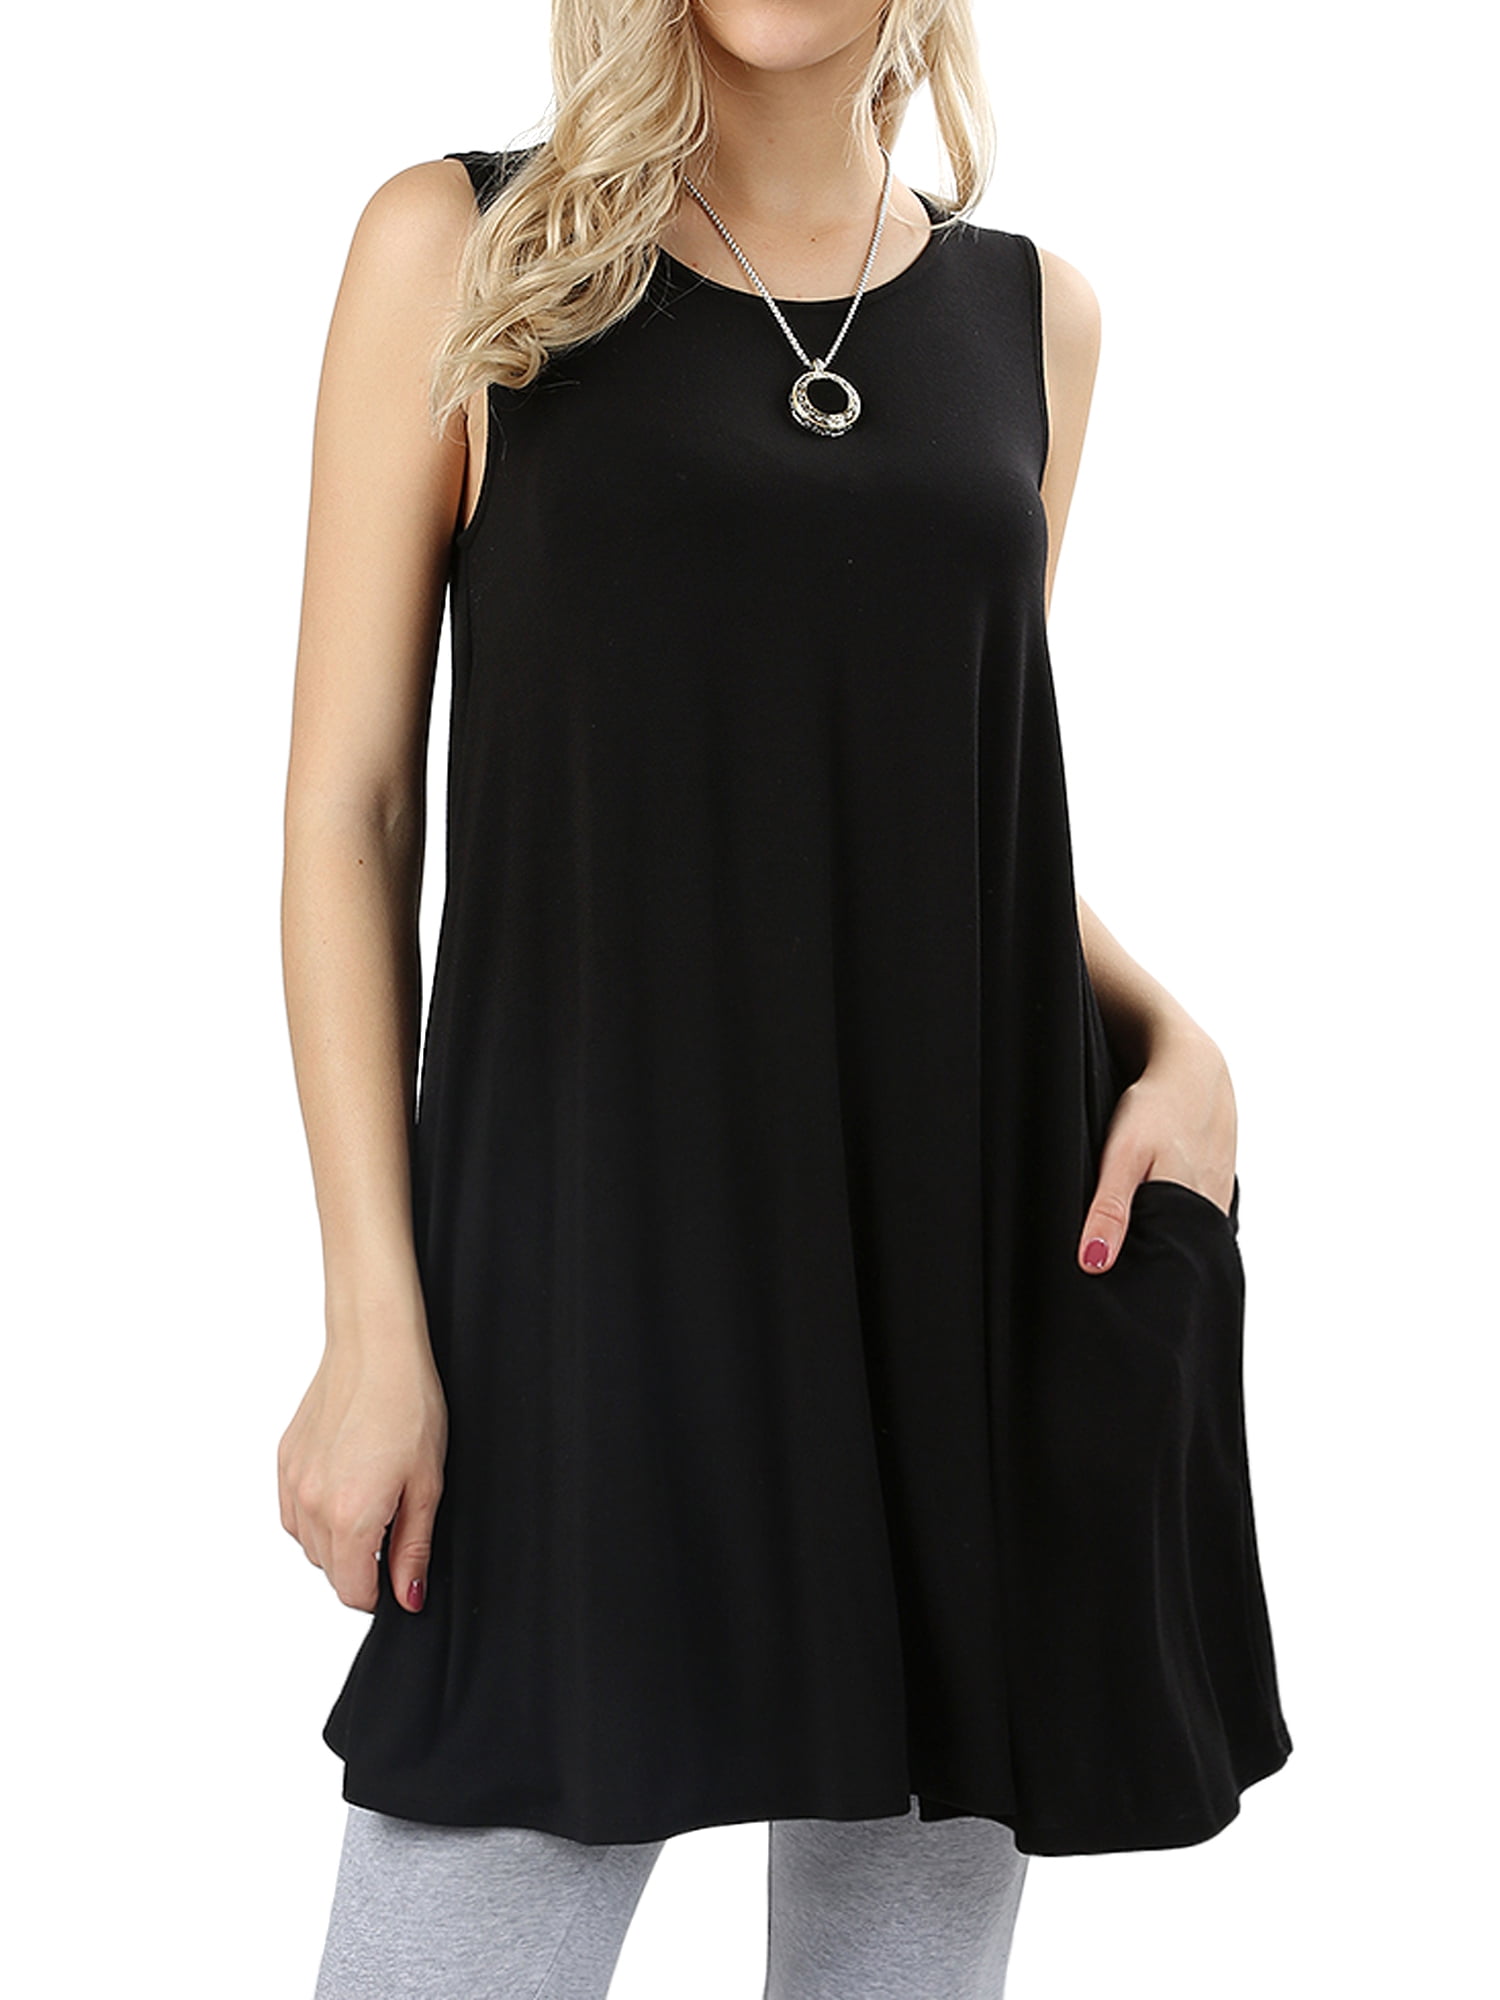 Women Round Neck Sleeveless Flowy Tunic Top with Side Pockets (Black, S ...